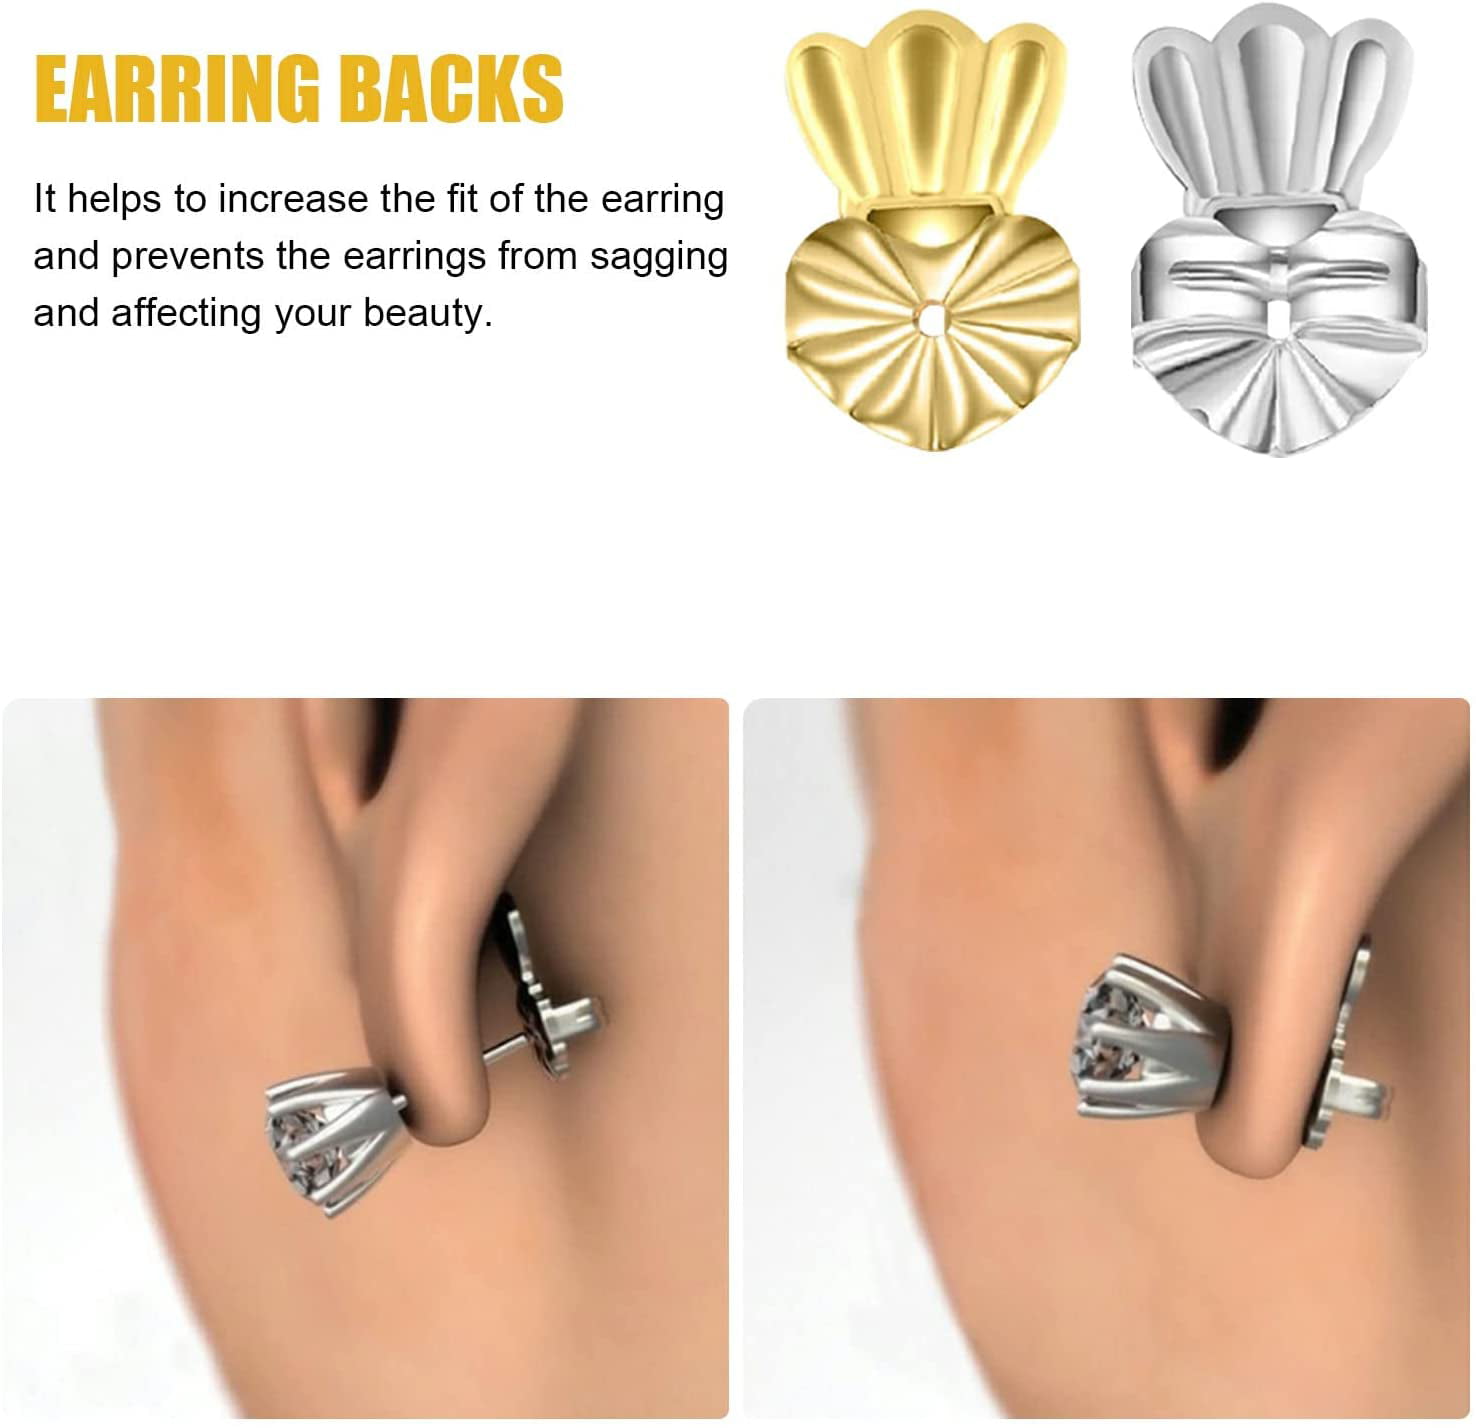 3 Pairs Earring Lifters,10MM Hypoallergenic Earring Backs for Droopy Ears,Adjustable Crown Earring Backs for Heavy Earring (10mm 2White+1gold)